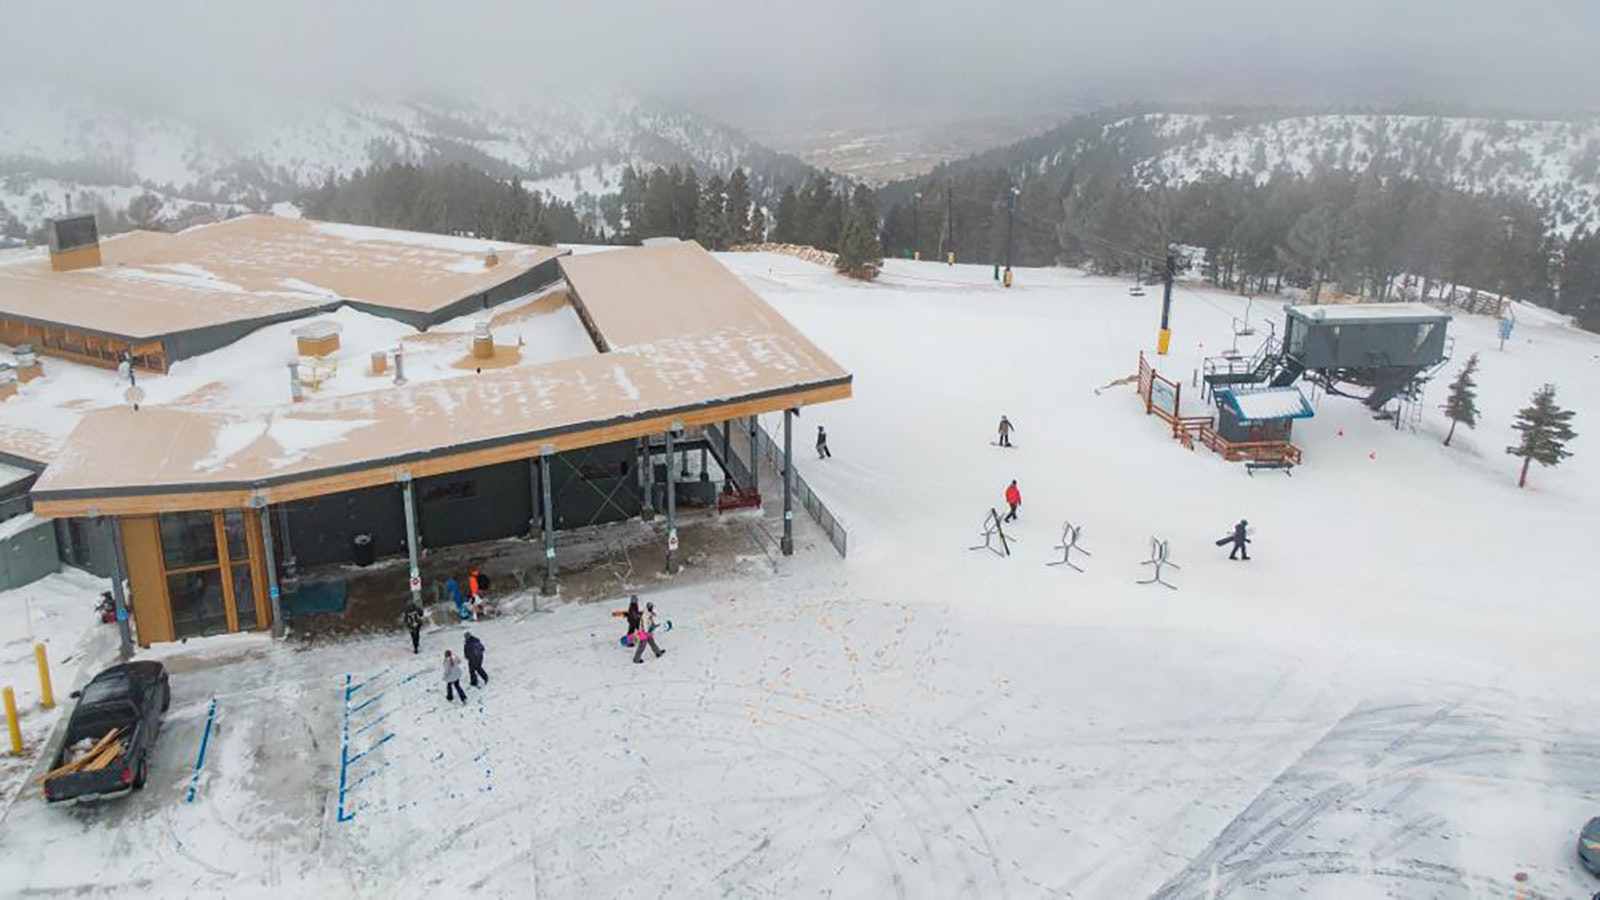 Hogadon Ski Area near Casper is different in that the parking and lodge are at the summit.